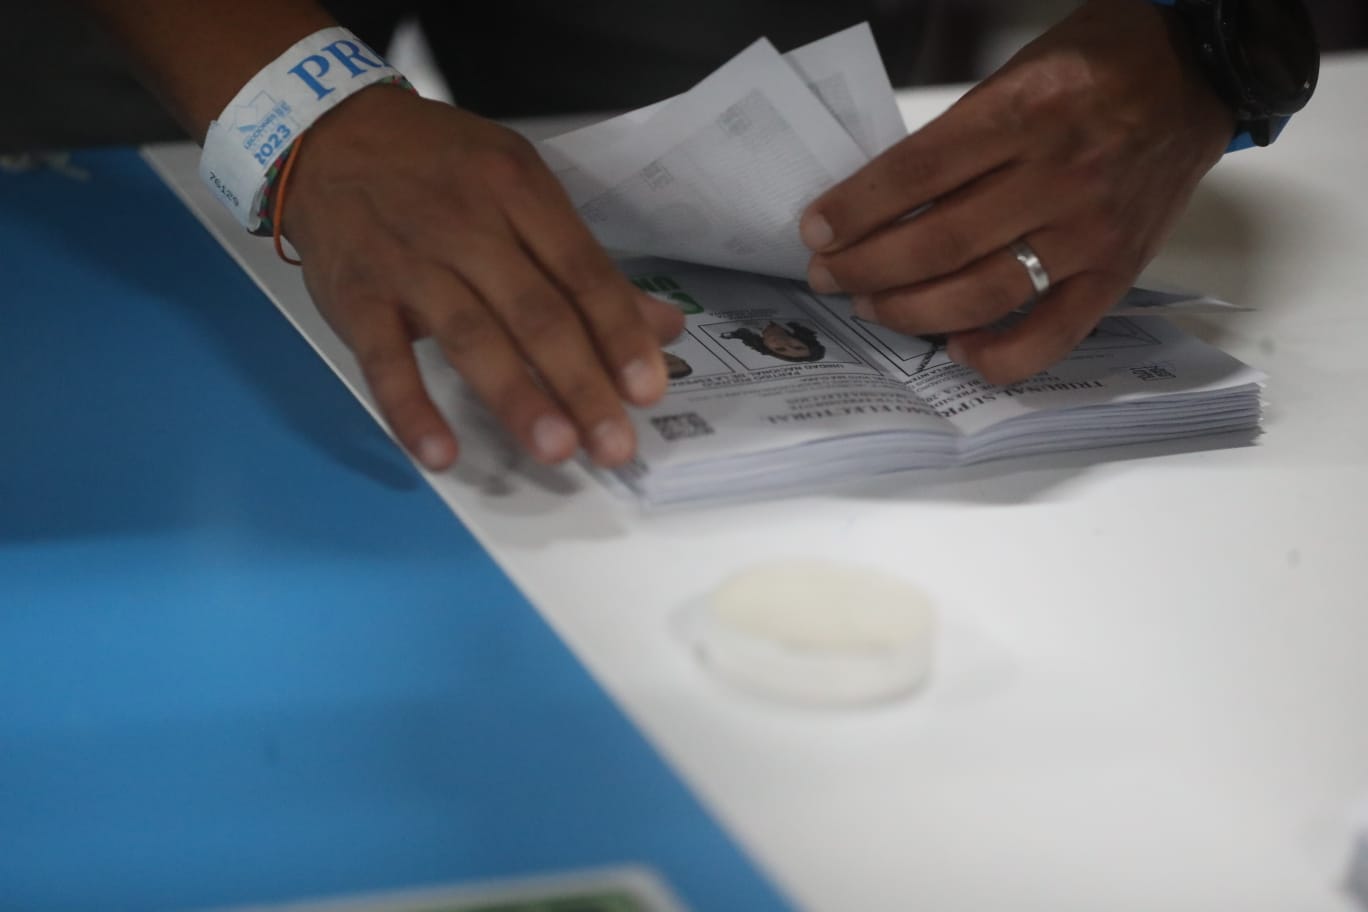 Who will win today’s election in Guatemala?